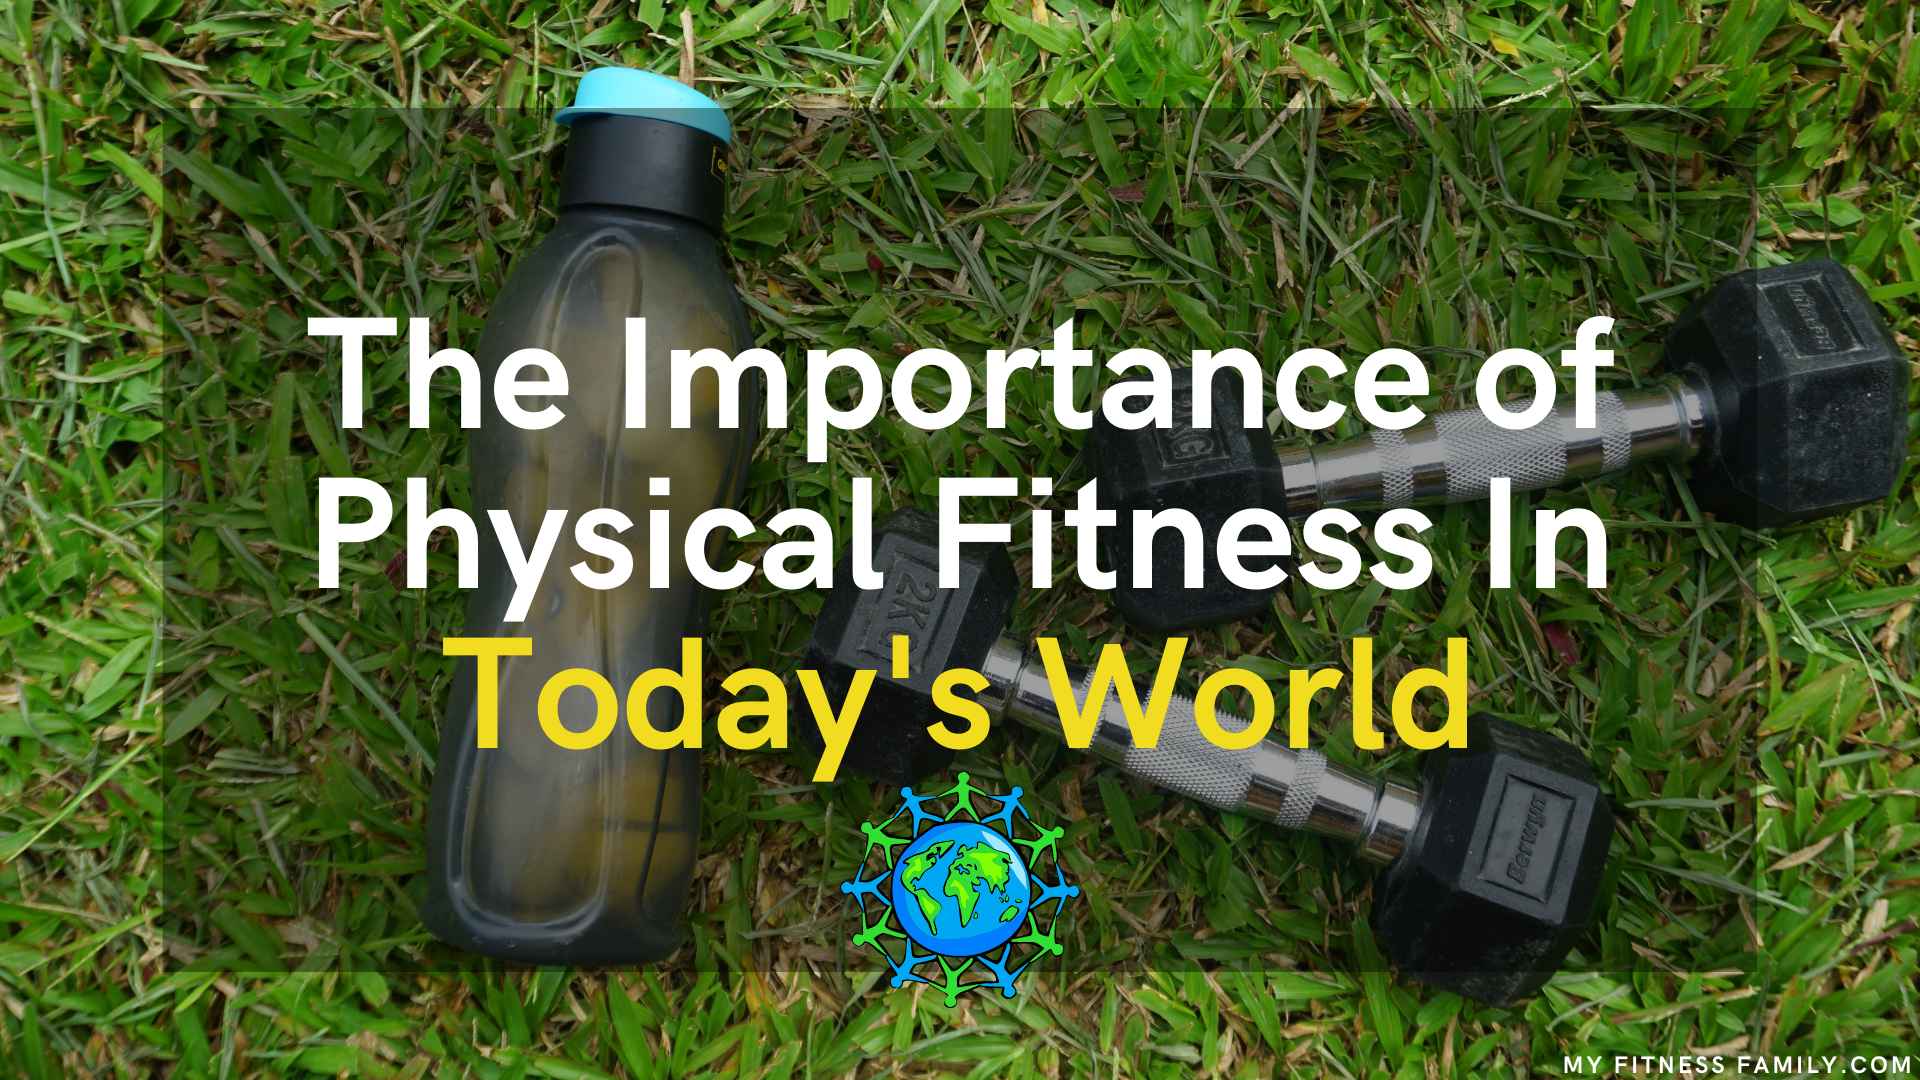 The Importance Of Physical Fitness In Today's World